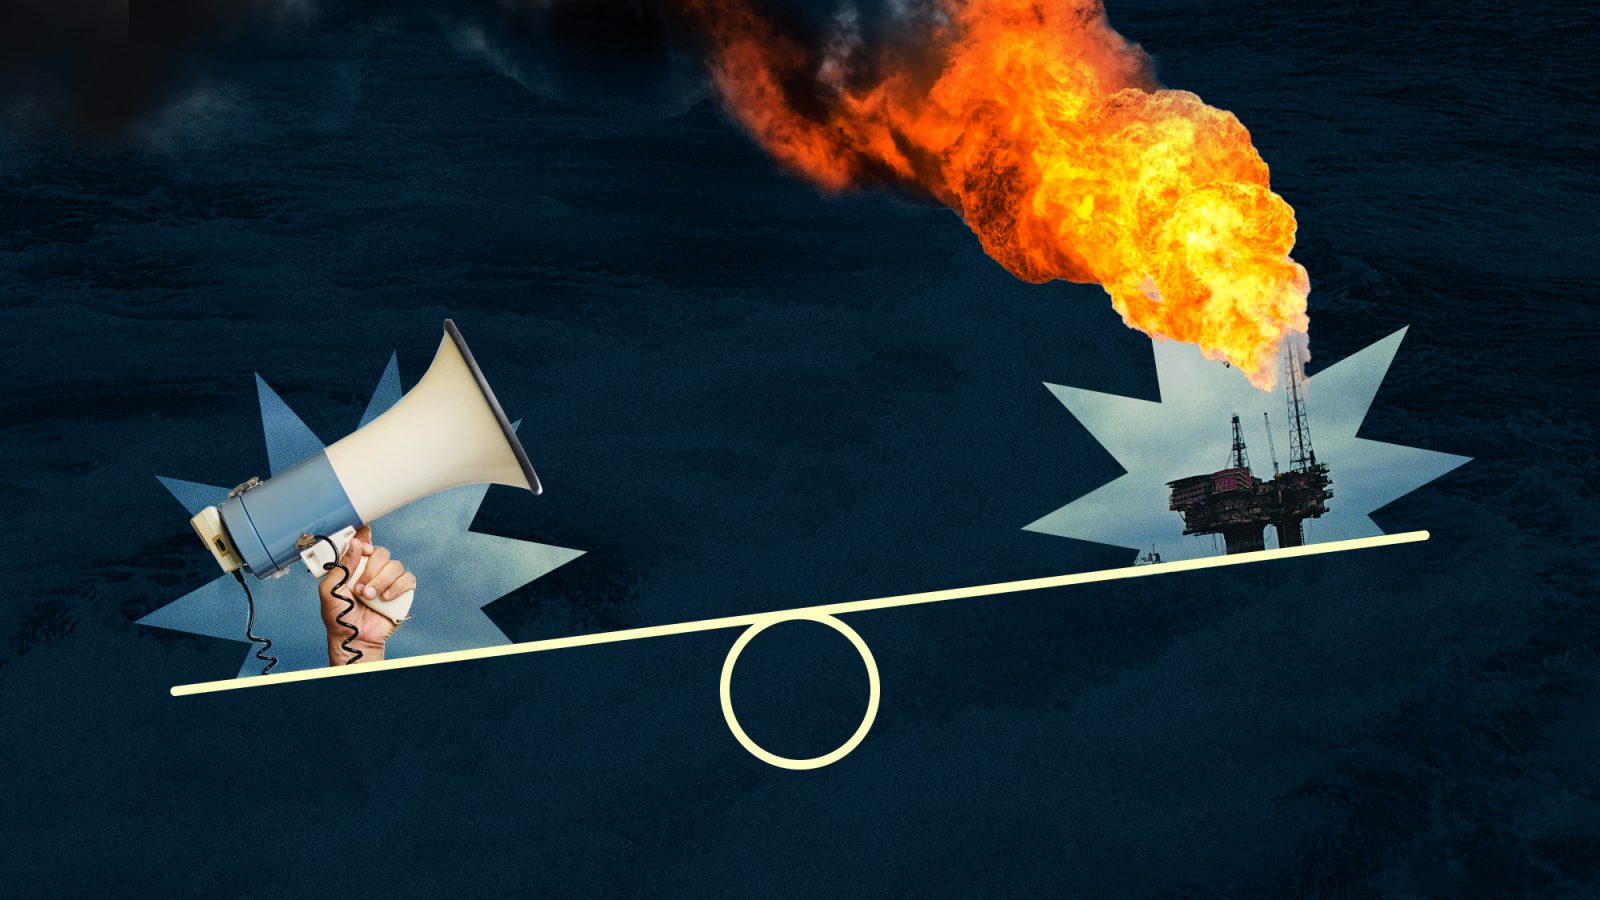 Bullhorn and oil tanker balancing on a scale